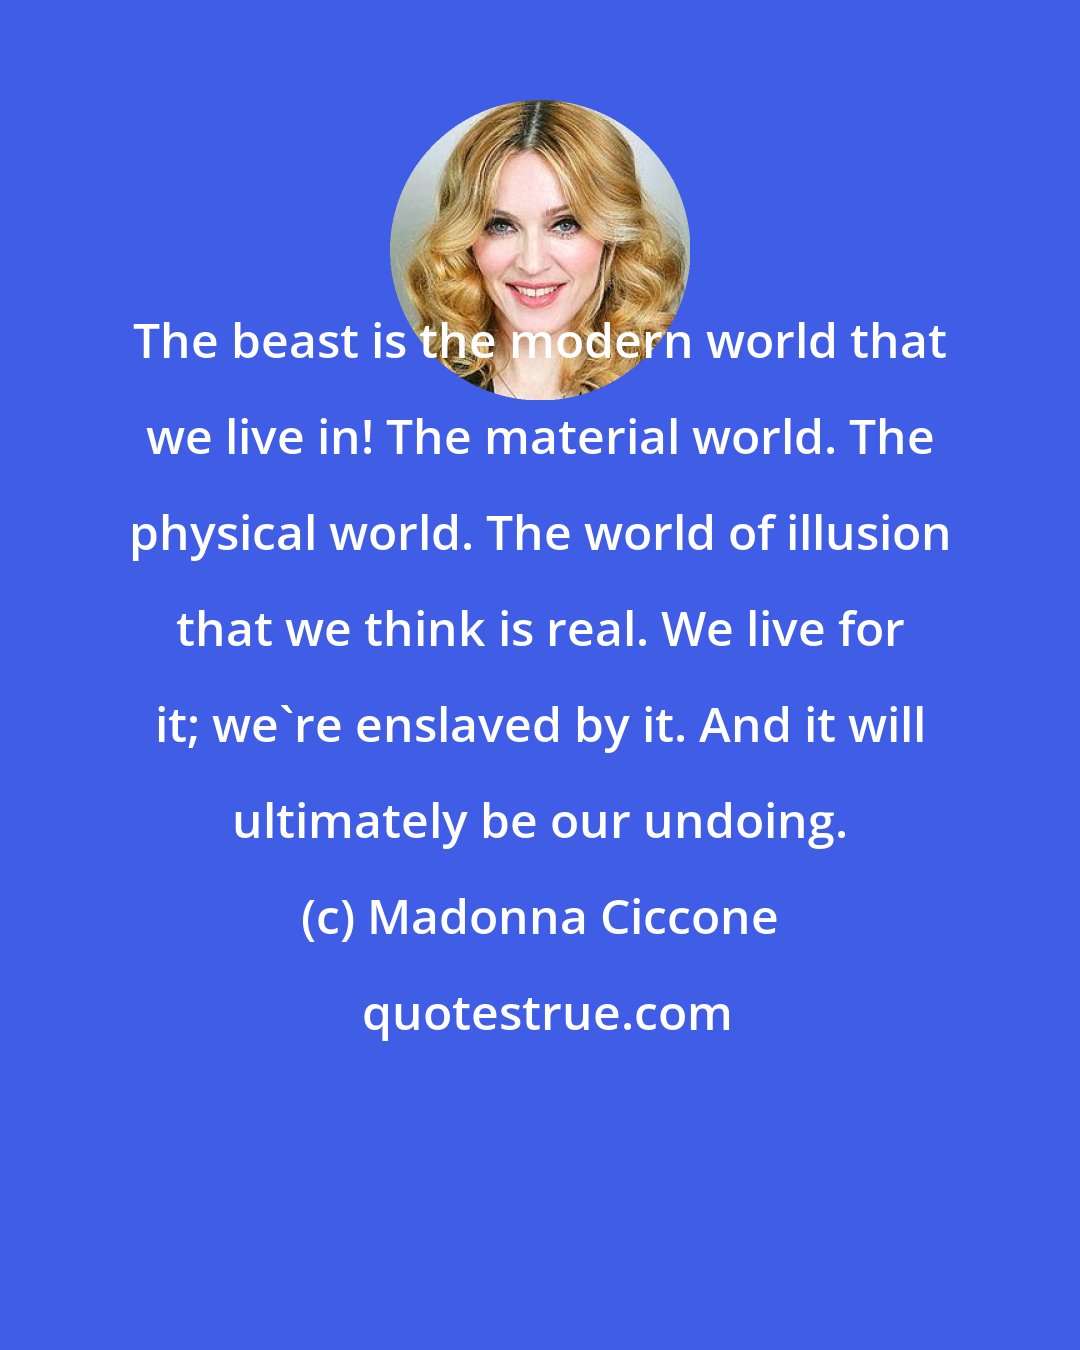 Madonna Ciccone: The beast is the modern world that we live in! The material world. The physical world. The world of illusion that we think is real. We live for it; we're enslaved by it. And it will ultimately be our undoing.